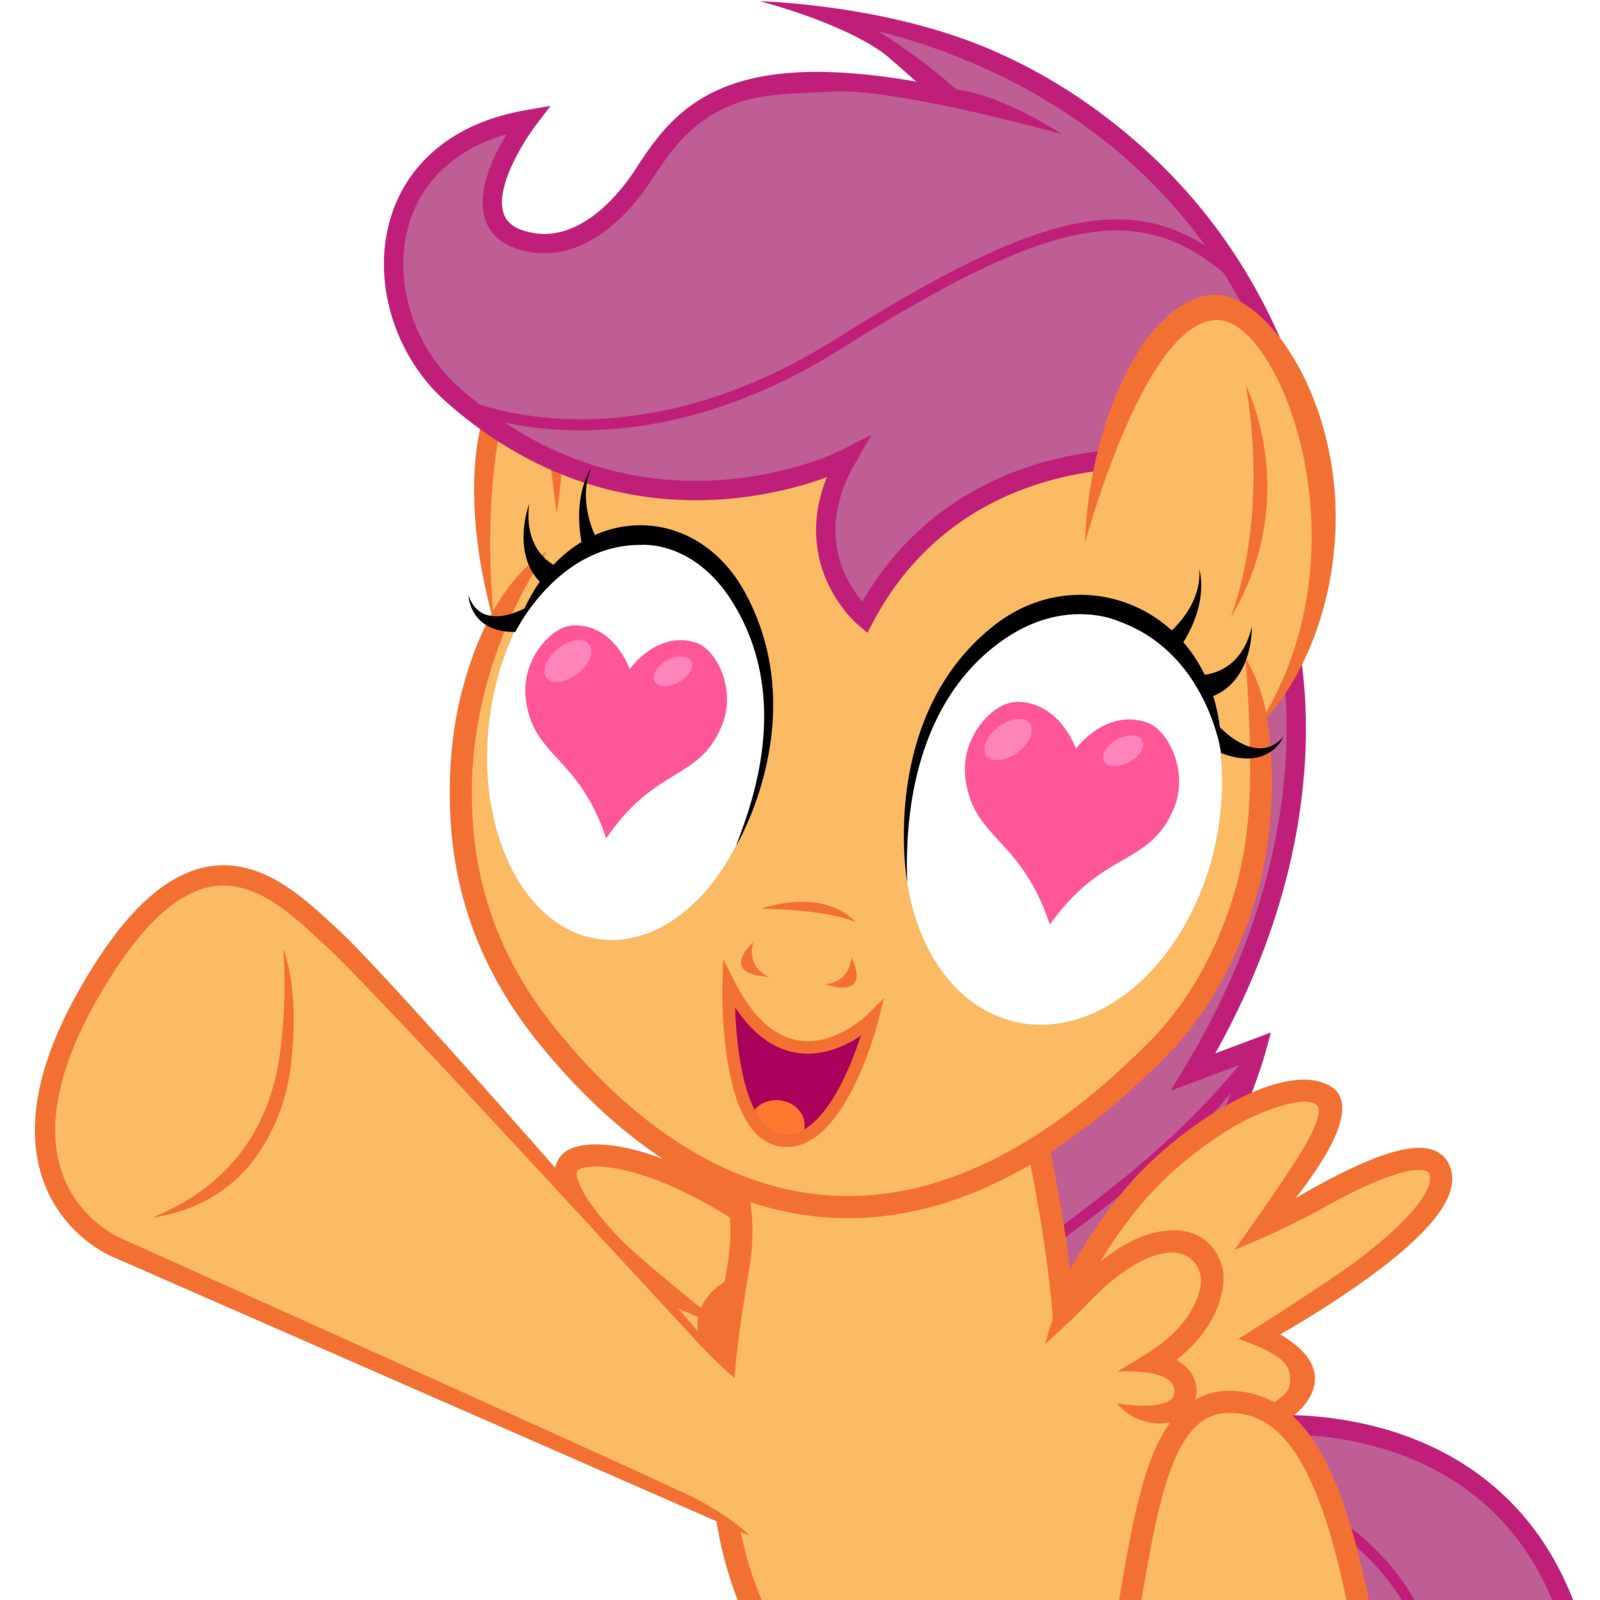 scootaloo___wants__fill_in_blank__by_cal